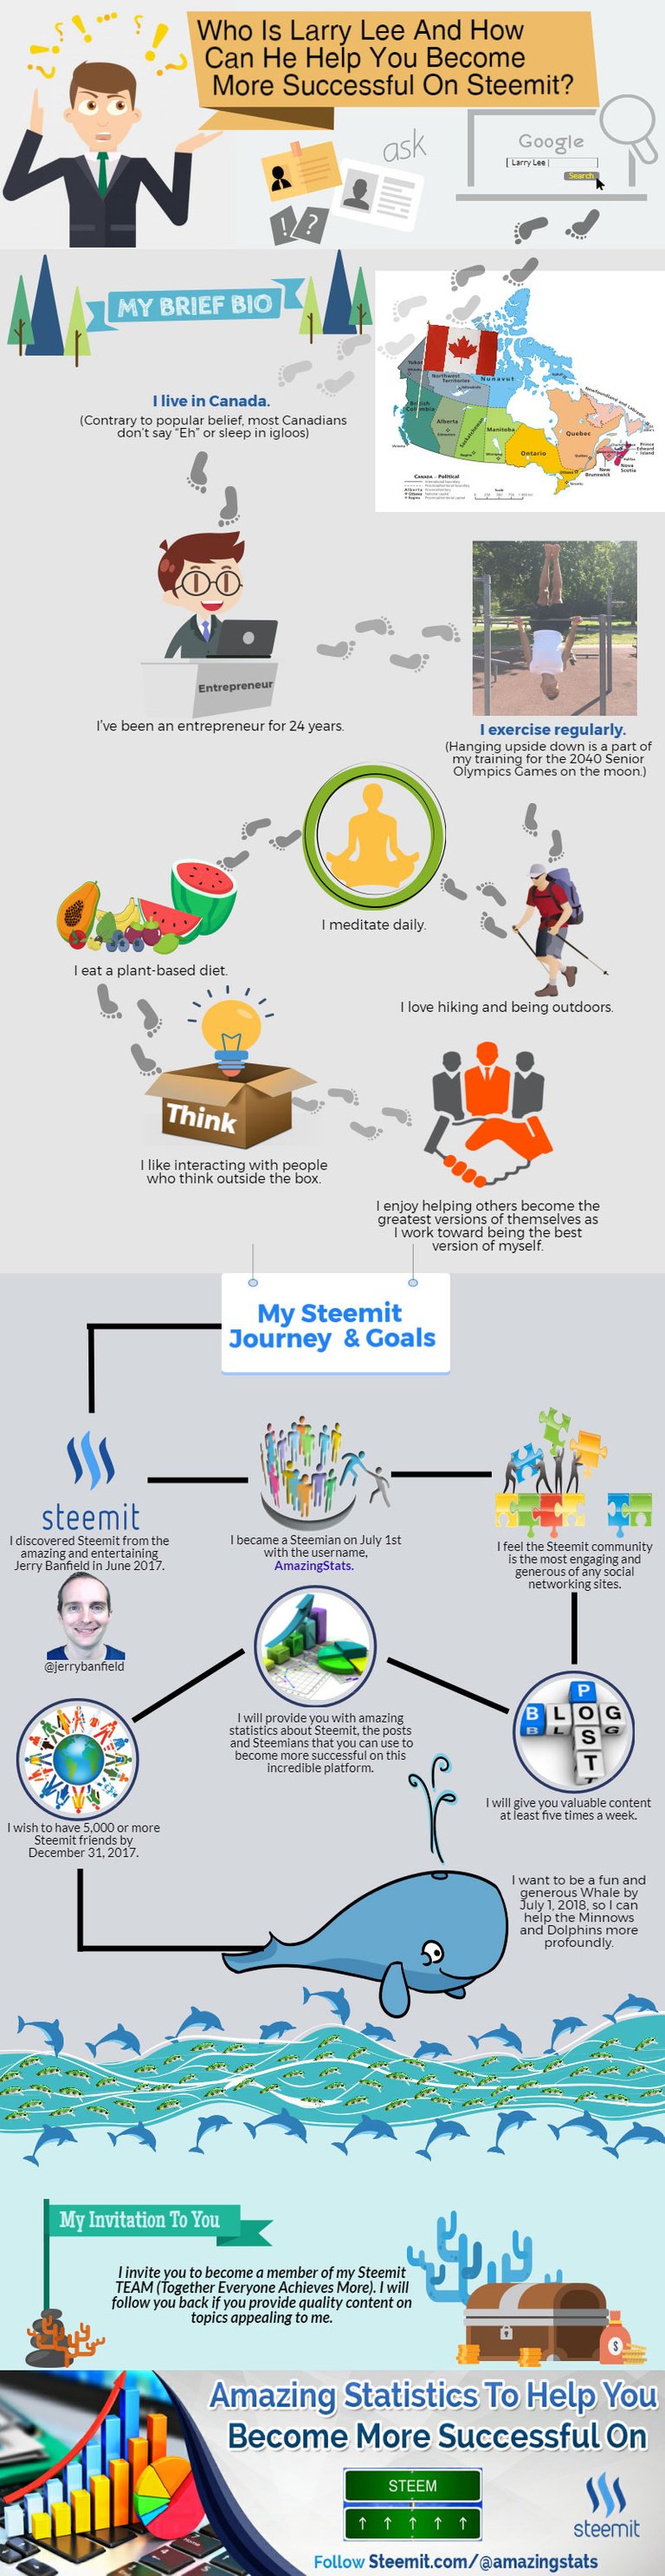 Steemit.com@AmazingStats-Blog-1-How-You-Can-Become-More-Successful-On-Steemit.com